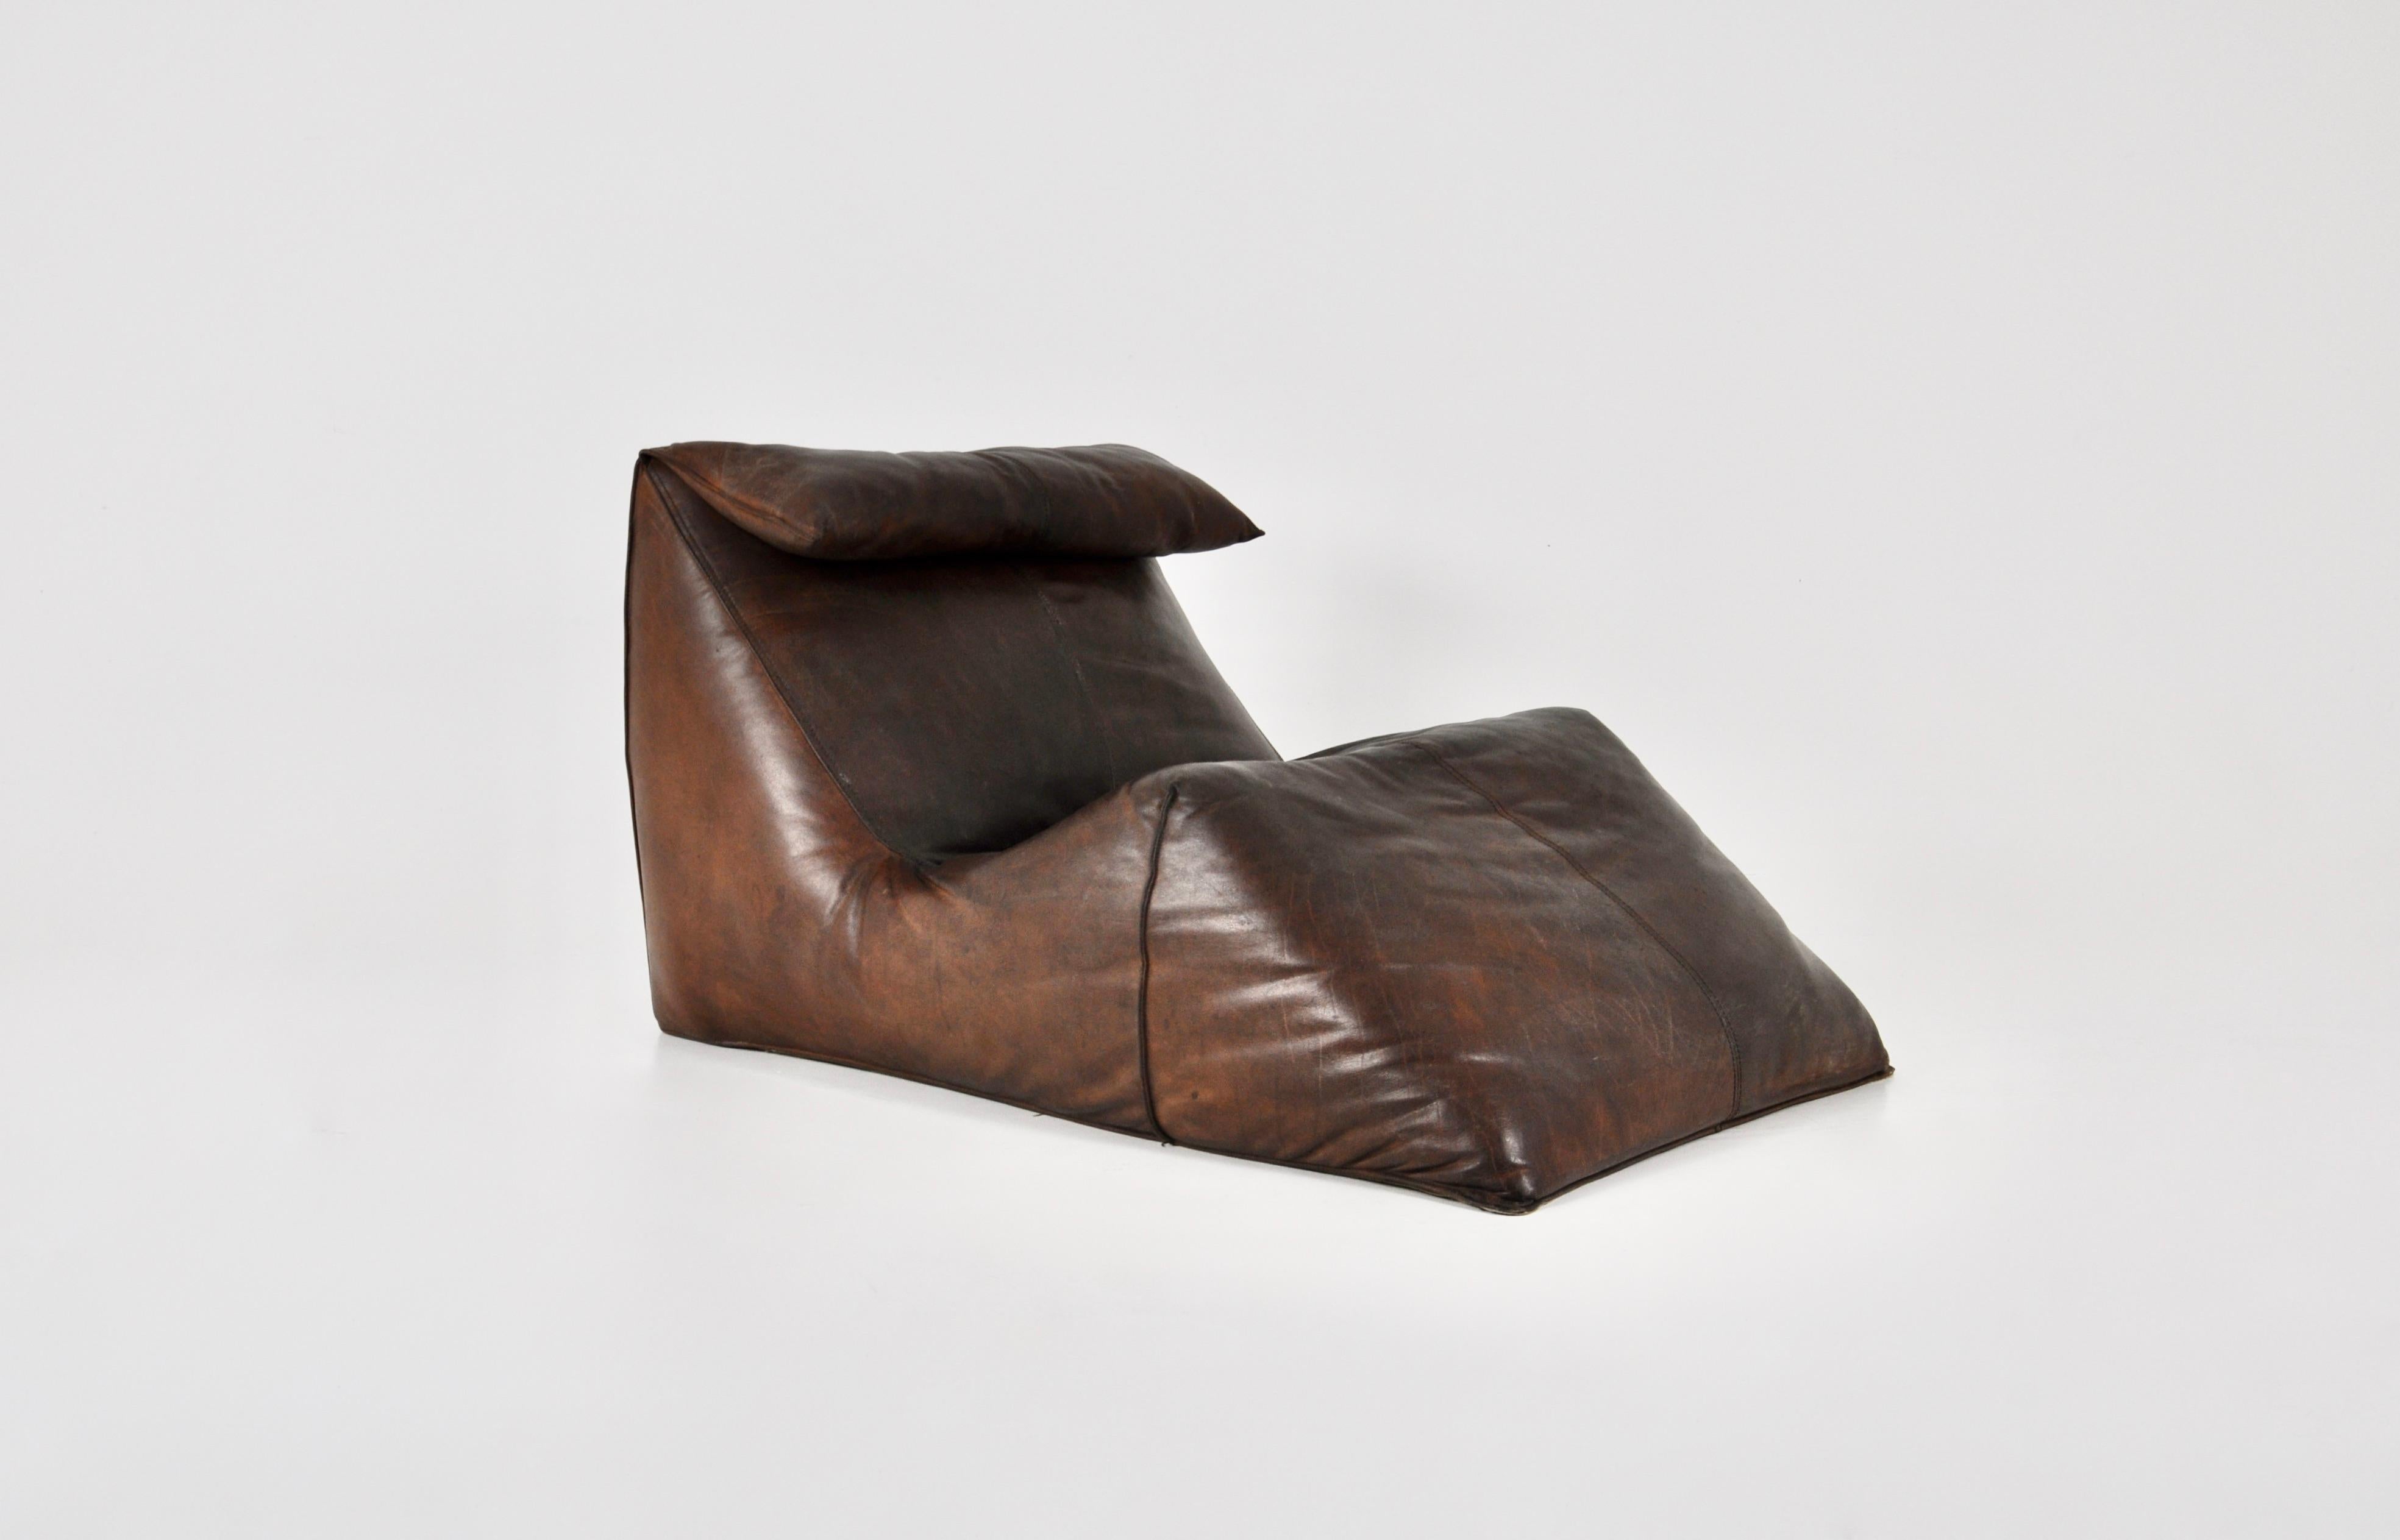 Lounge chair in brown leather designed by Mario Bellini. Model: Le Bambole. Stamped C&B Italia under the seat. Wear due to time and age of the lounge chair